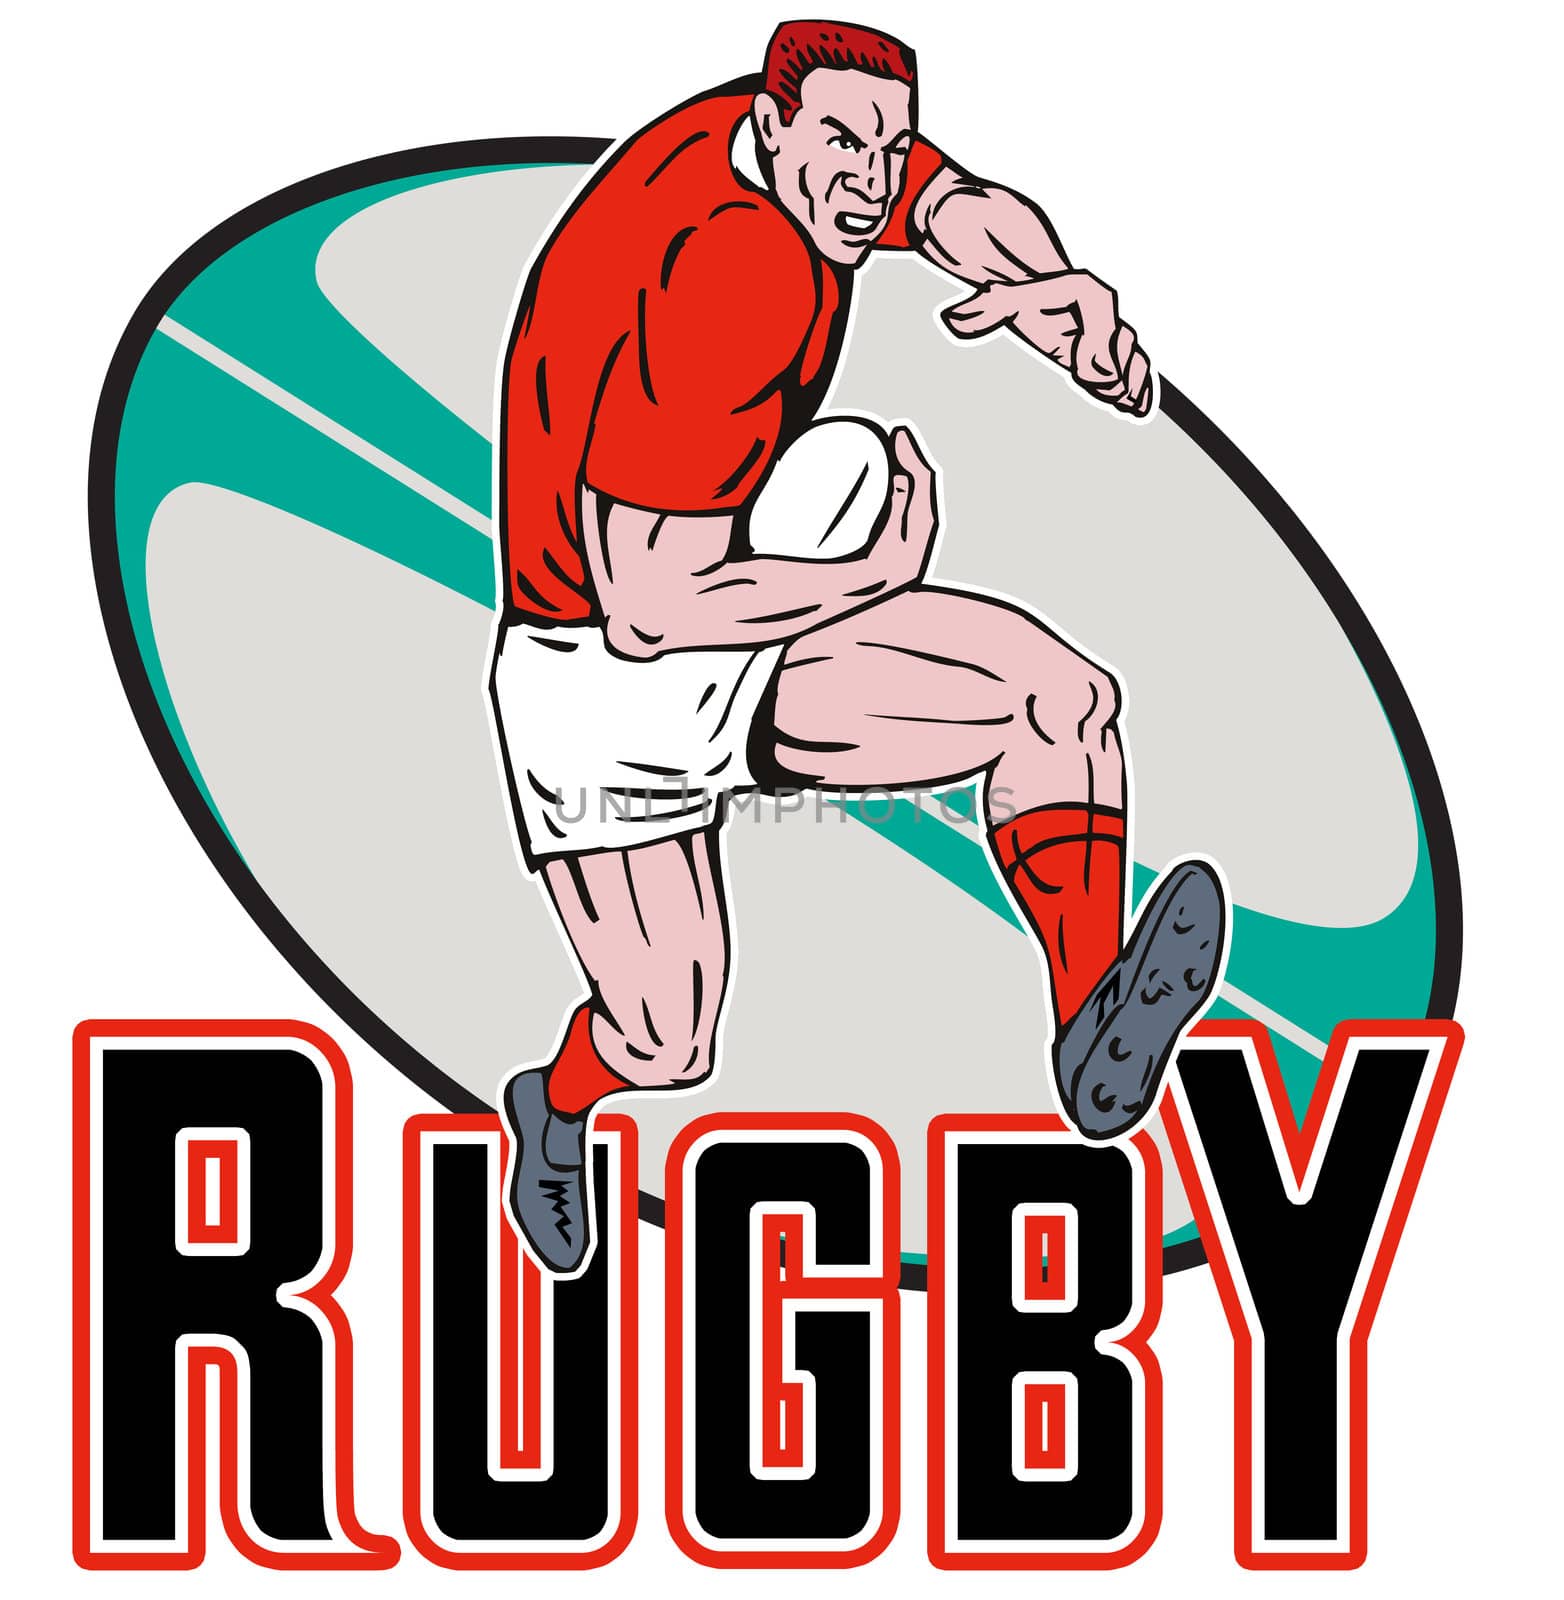 illustration of a Cartoon Welsh Rugby player running fending off  with ball in background